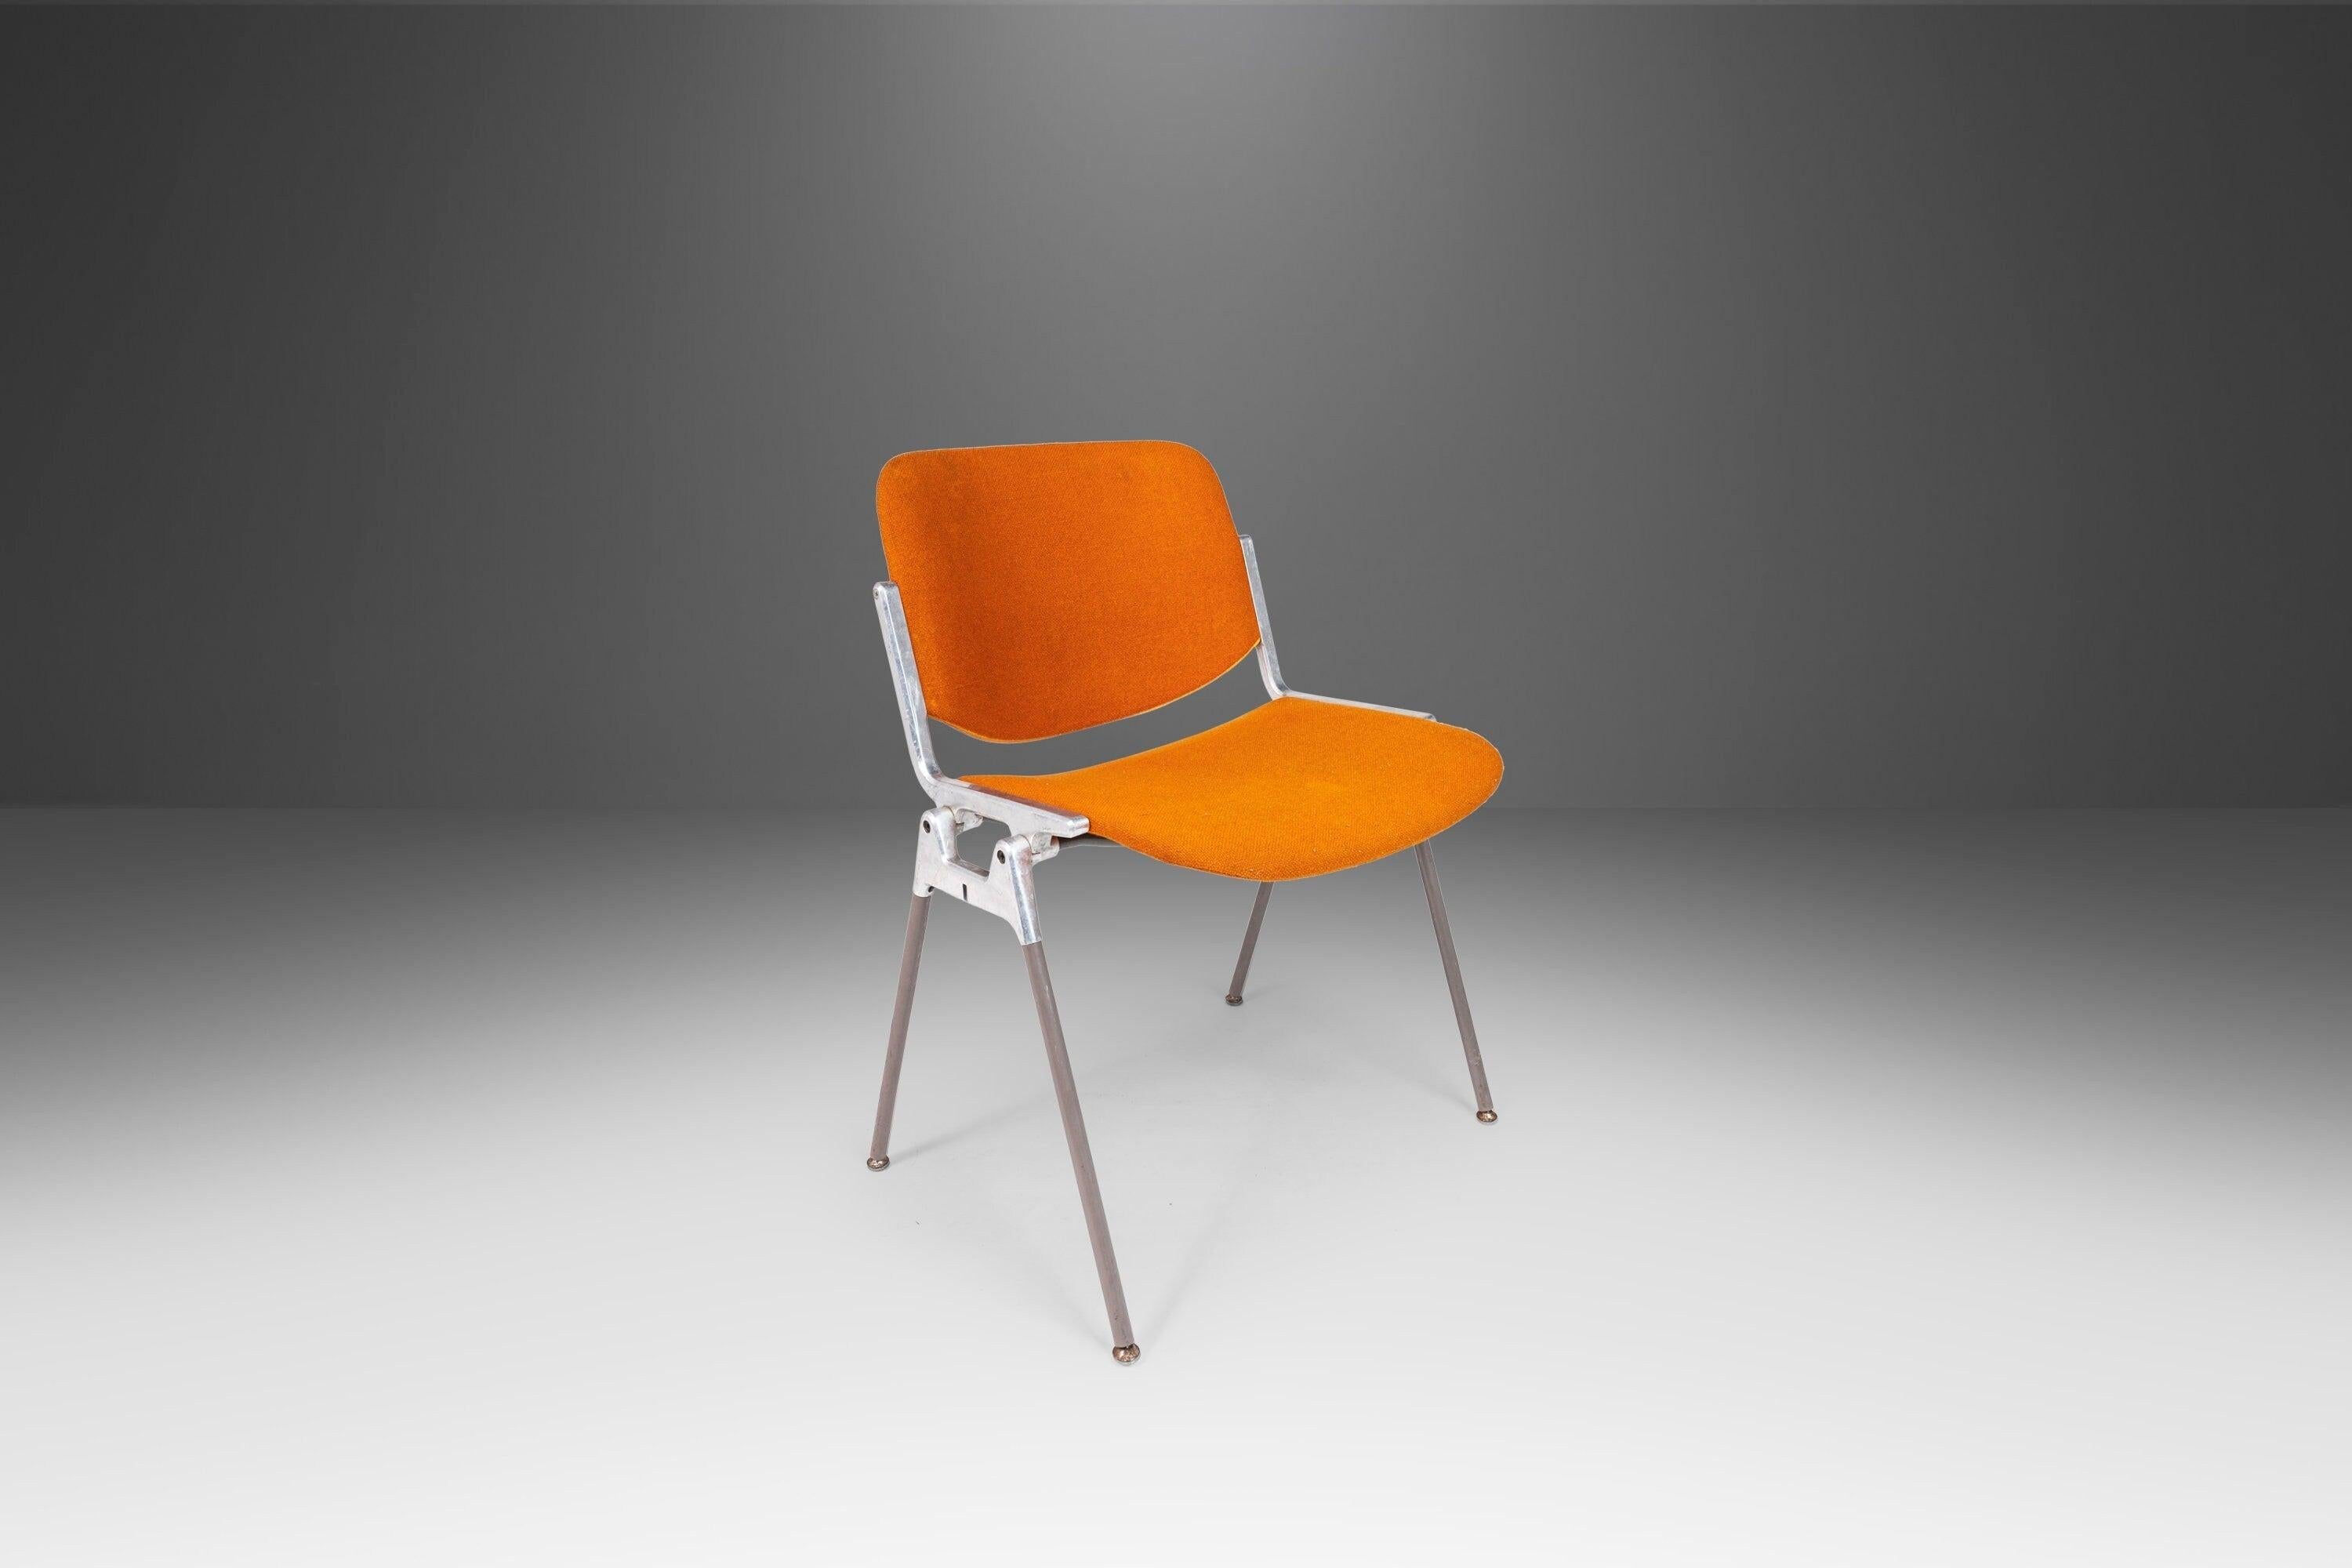 This iconic set of Italian Modern DSC Model 106 stacking chairs, designed in 1965 by Giancarlo Piretti for Castelli, is in 100% original, vintage condition. The chairs do show signs of wear and patina but we think it only adds to the already bold